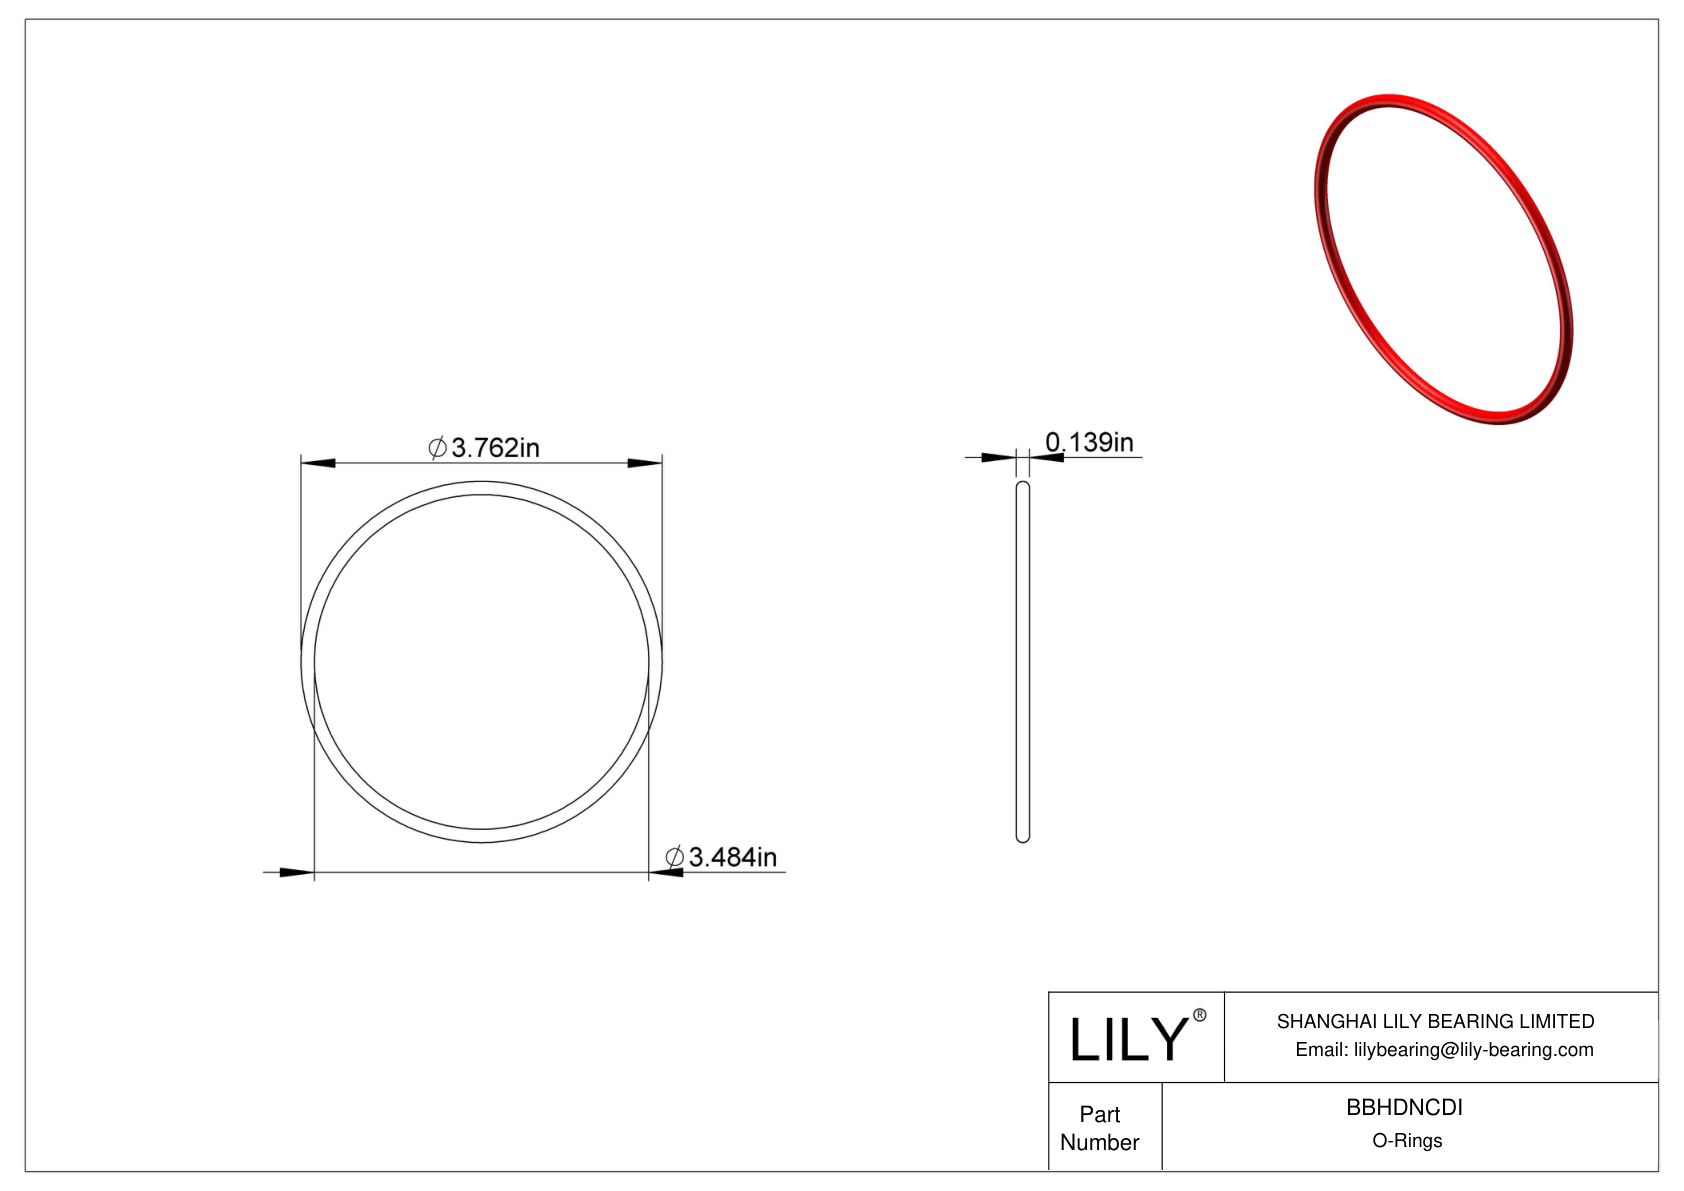 BBHDNCDI High Temperature O-Rings Round cad drawing